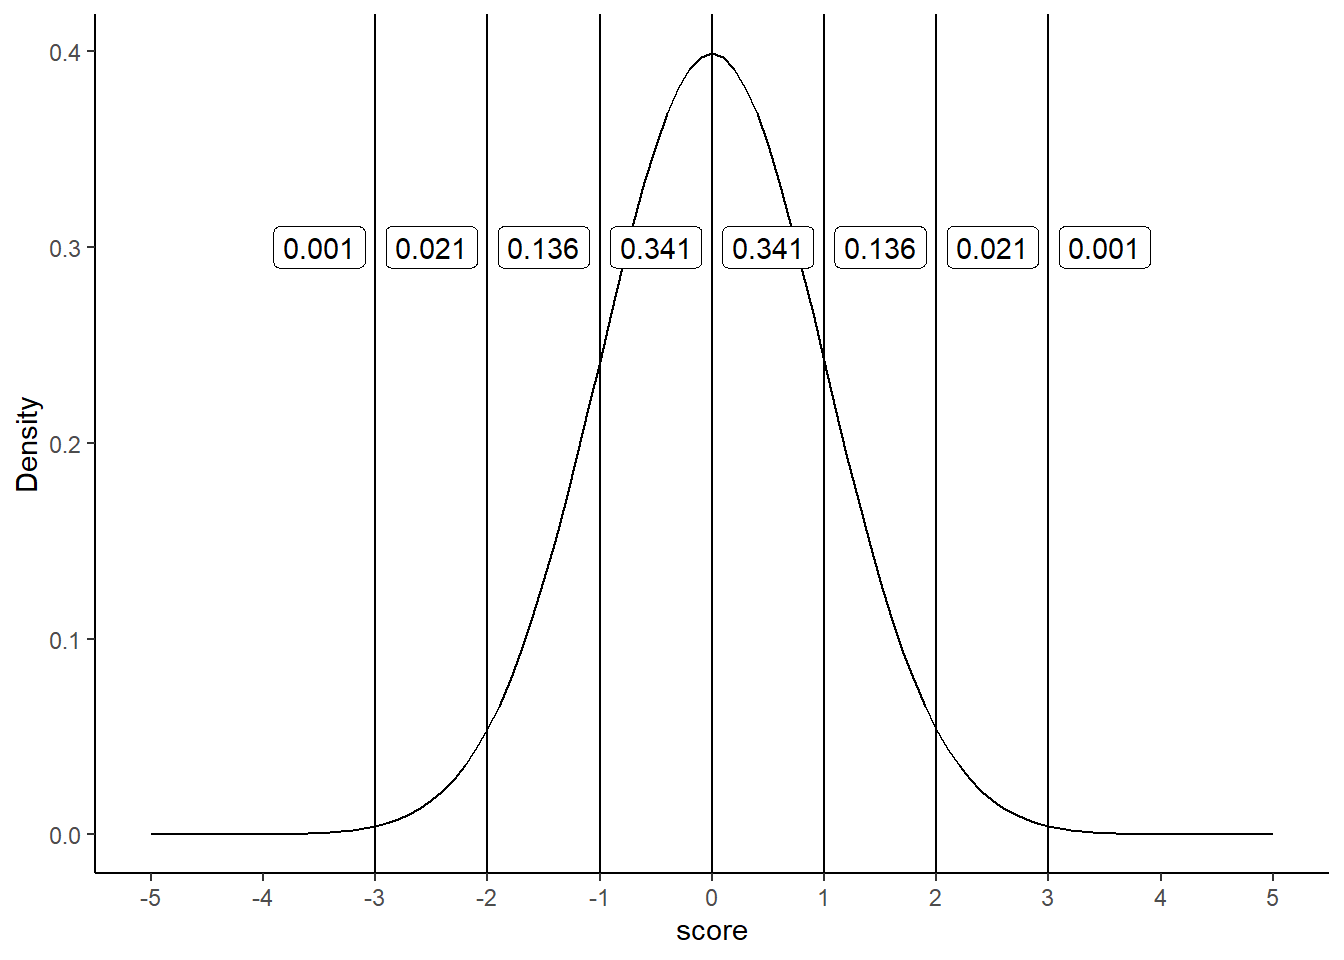 A normal distribution. Each line represents a standard deviation from the mean. The labels show the proportions of scores that fall between each bar.